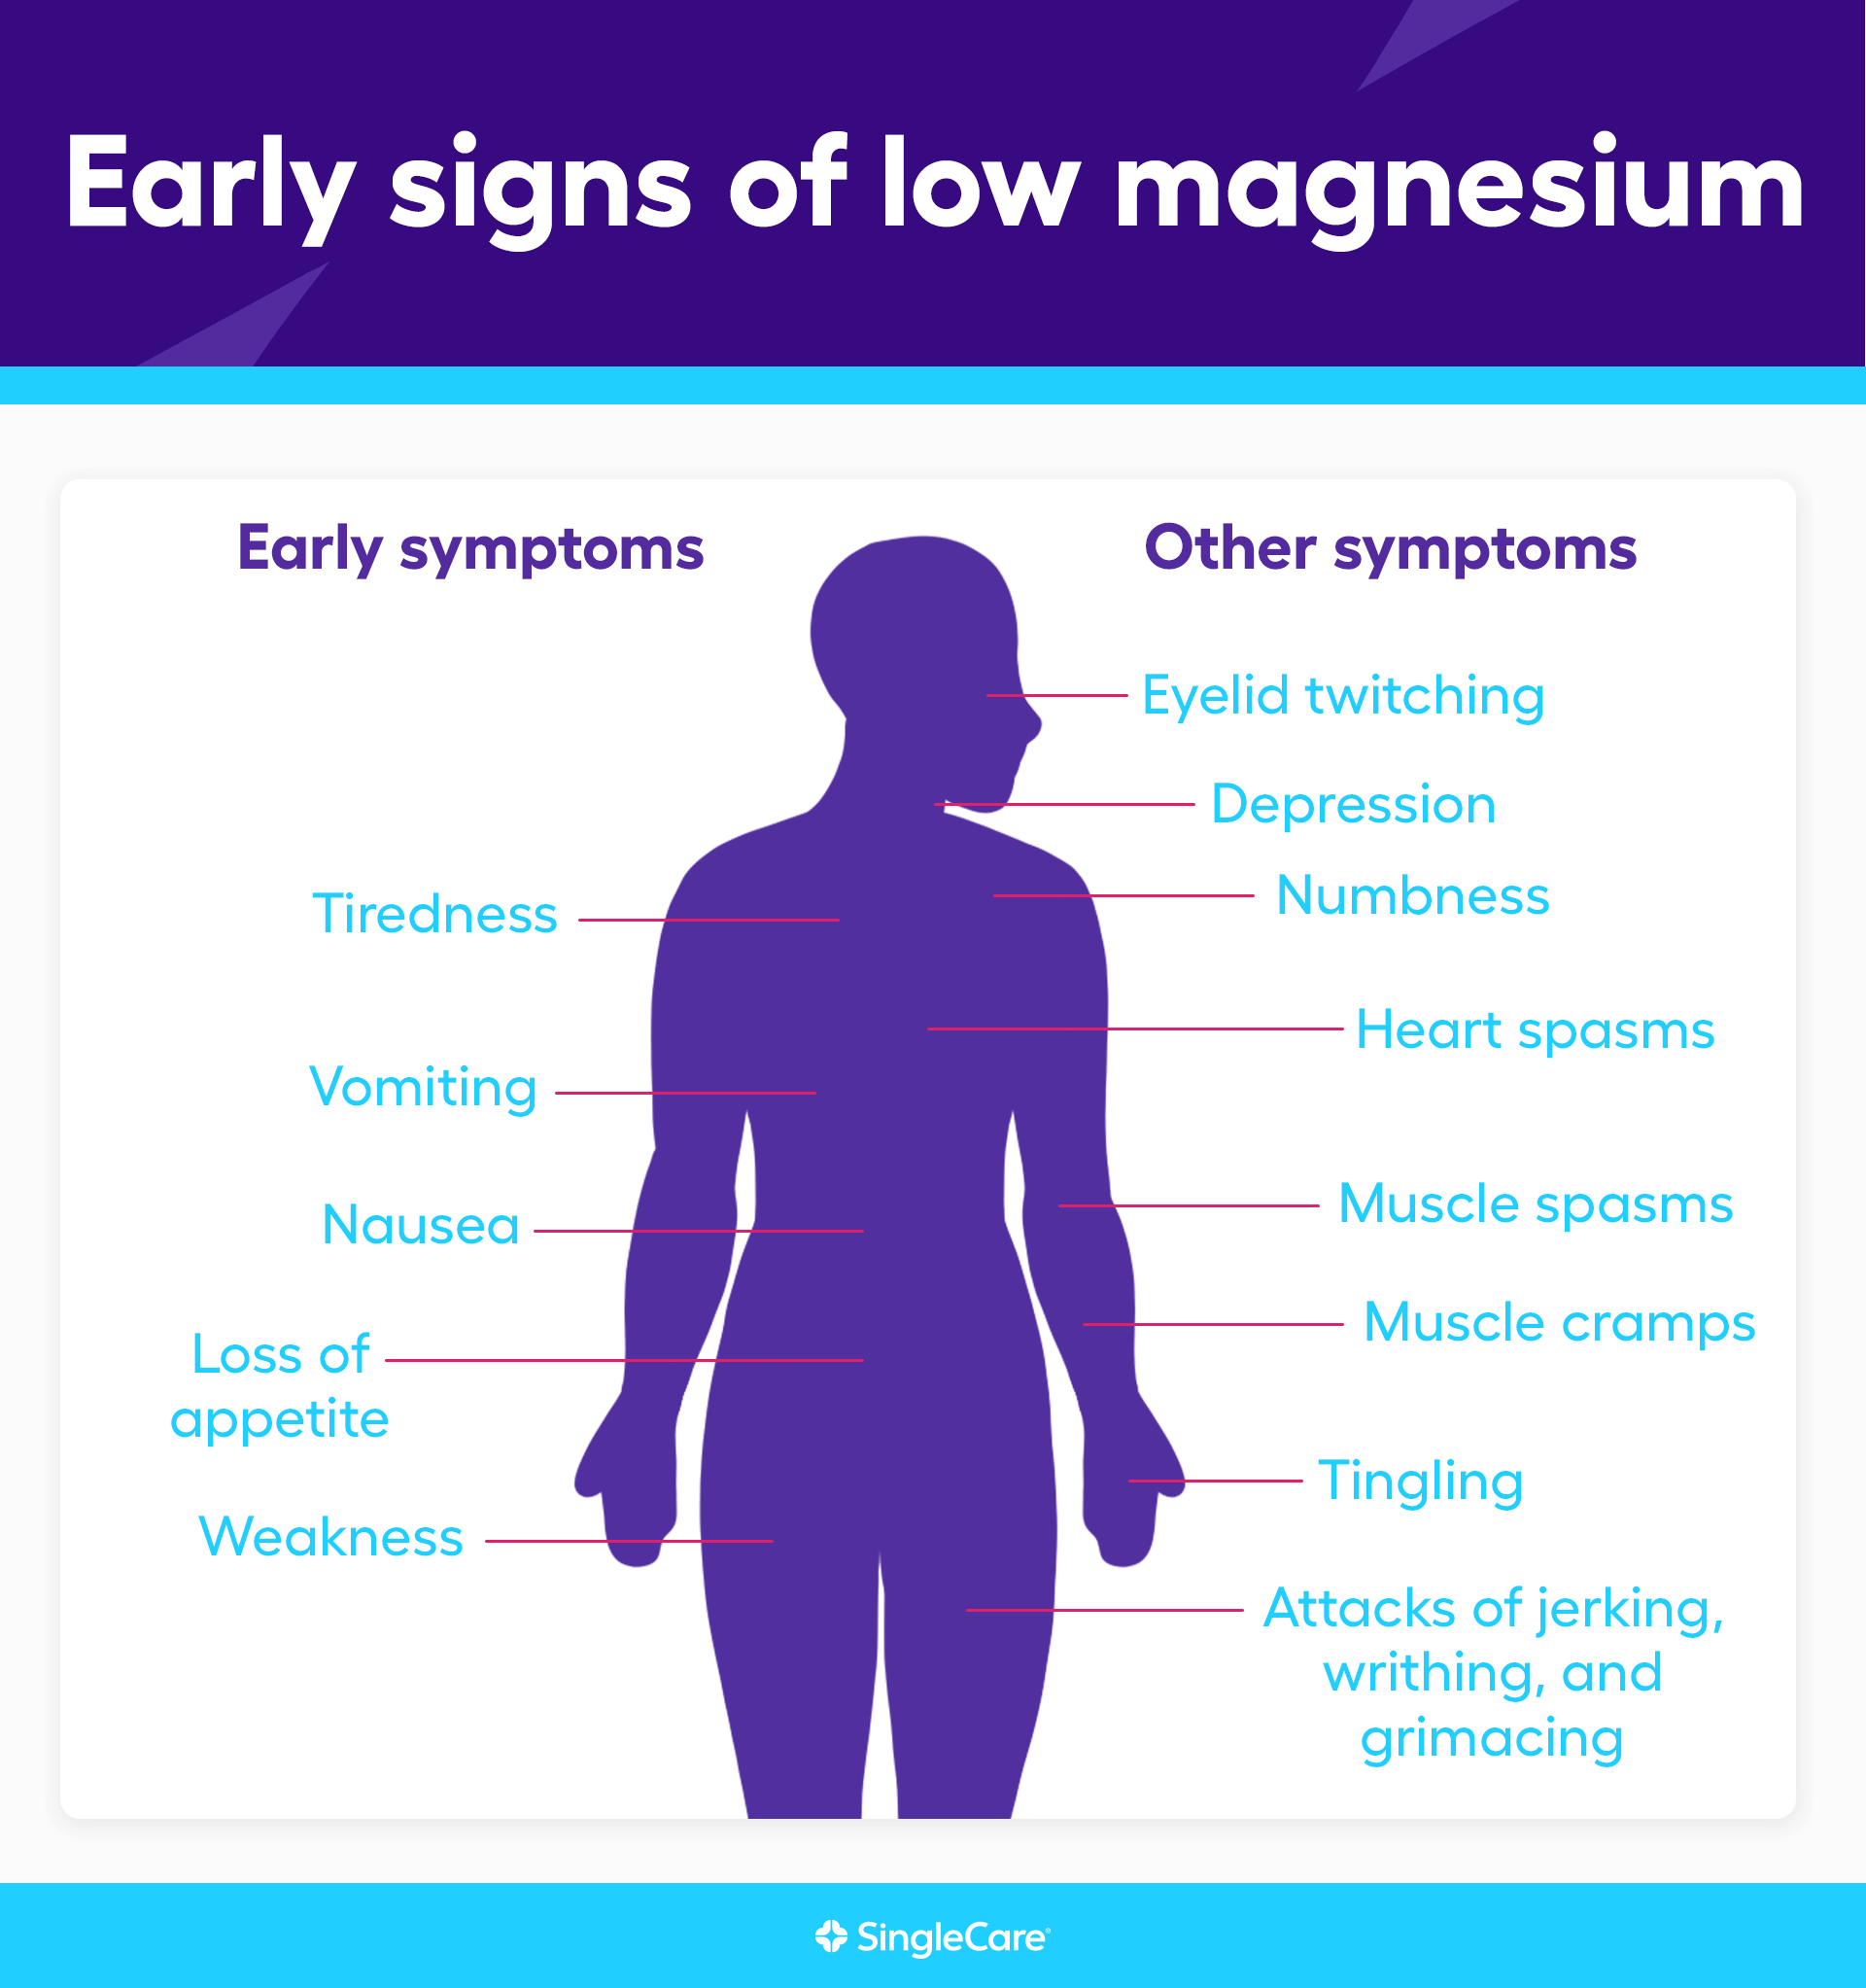 What are the symptoms of low magnesium?